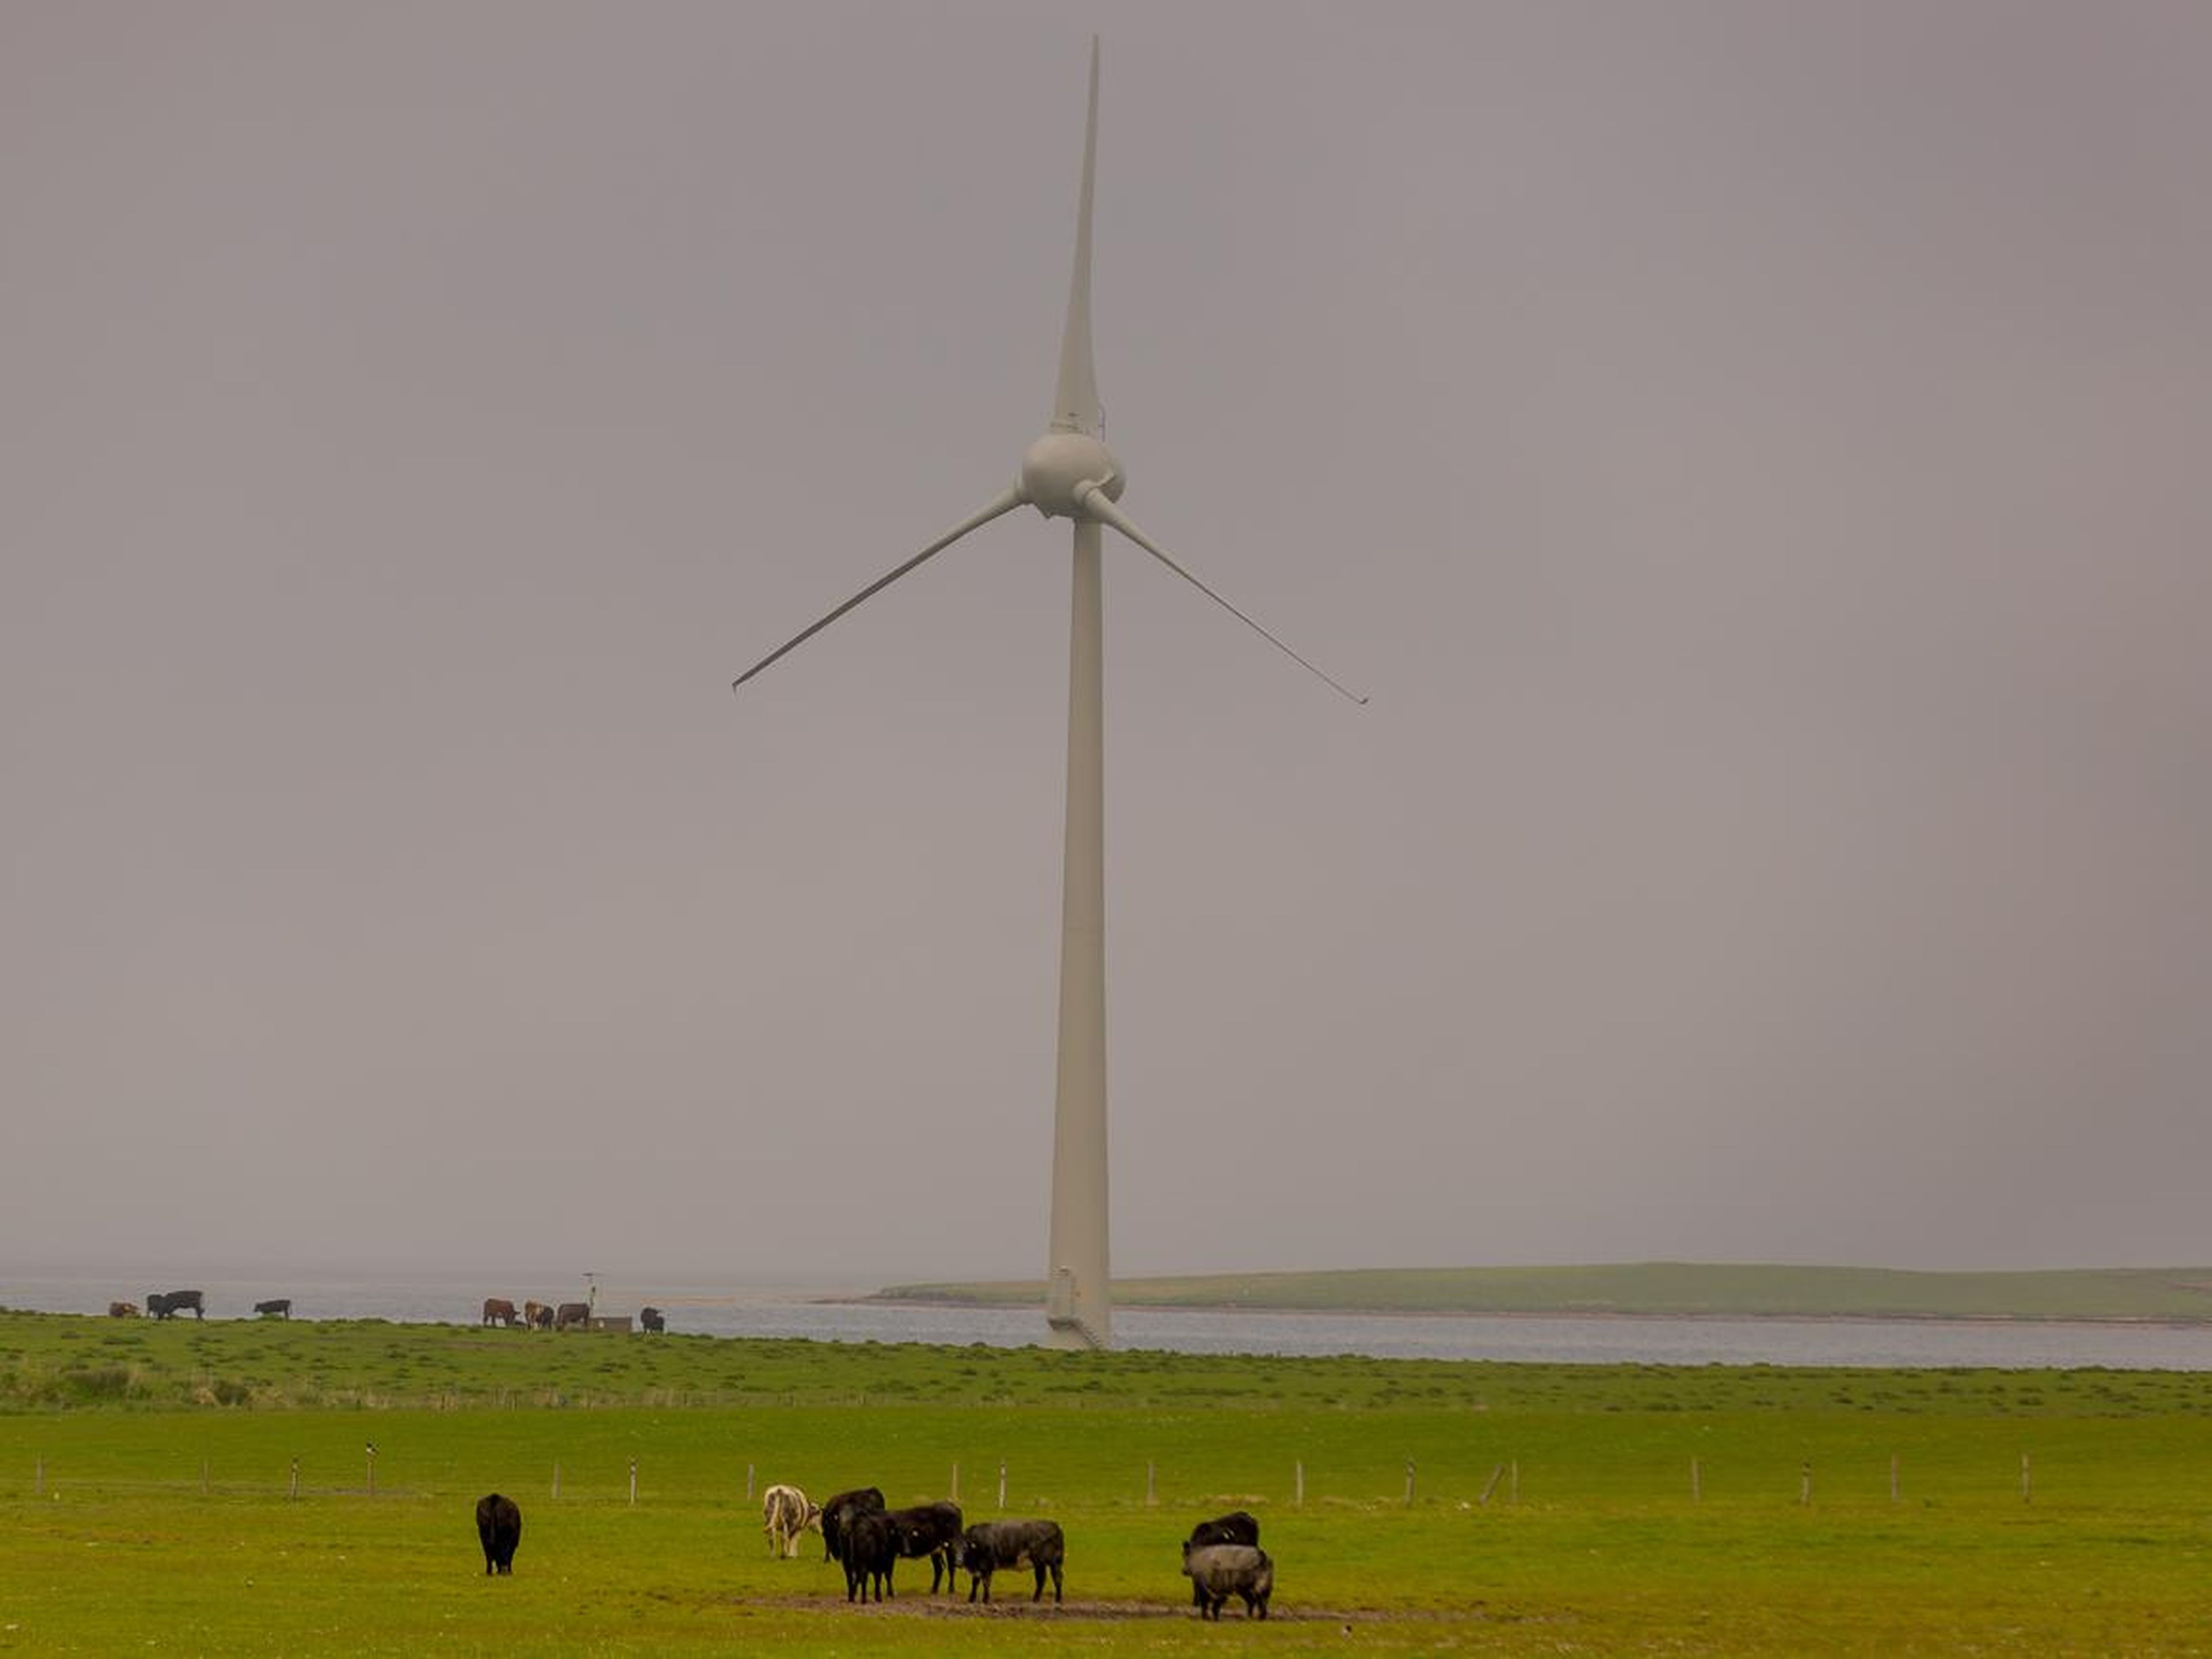 Part of the reason Microsoft chose Orkney was because the islands are a hub for renewable energy research.